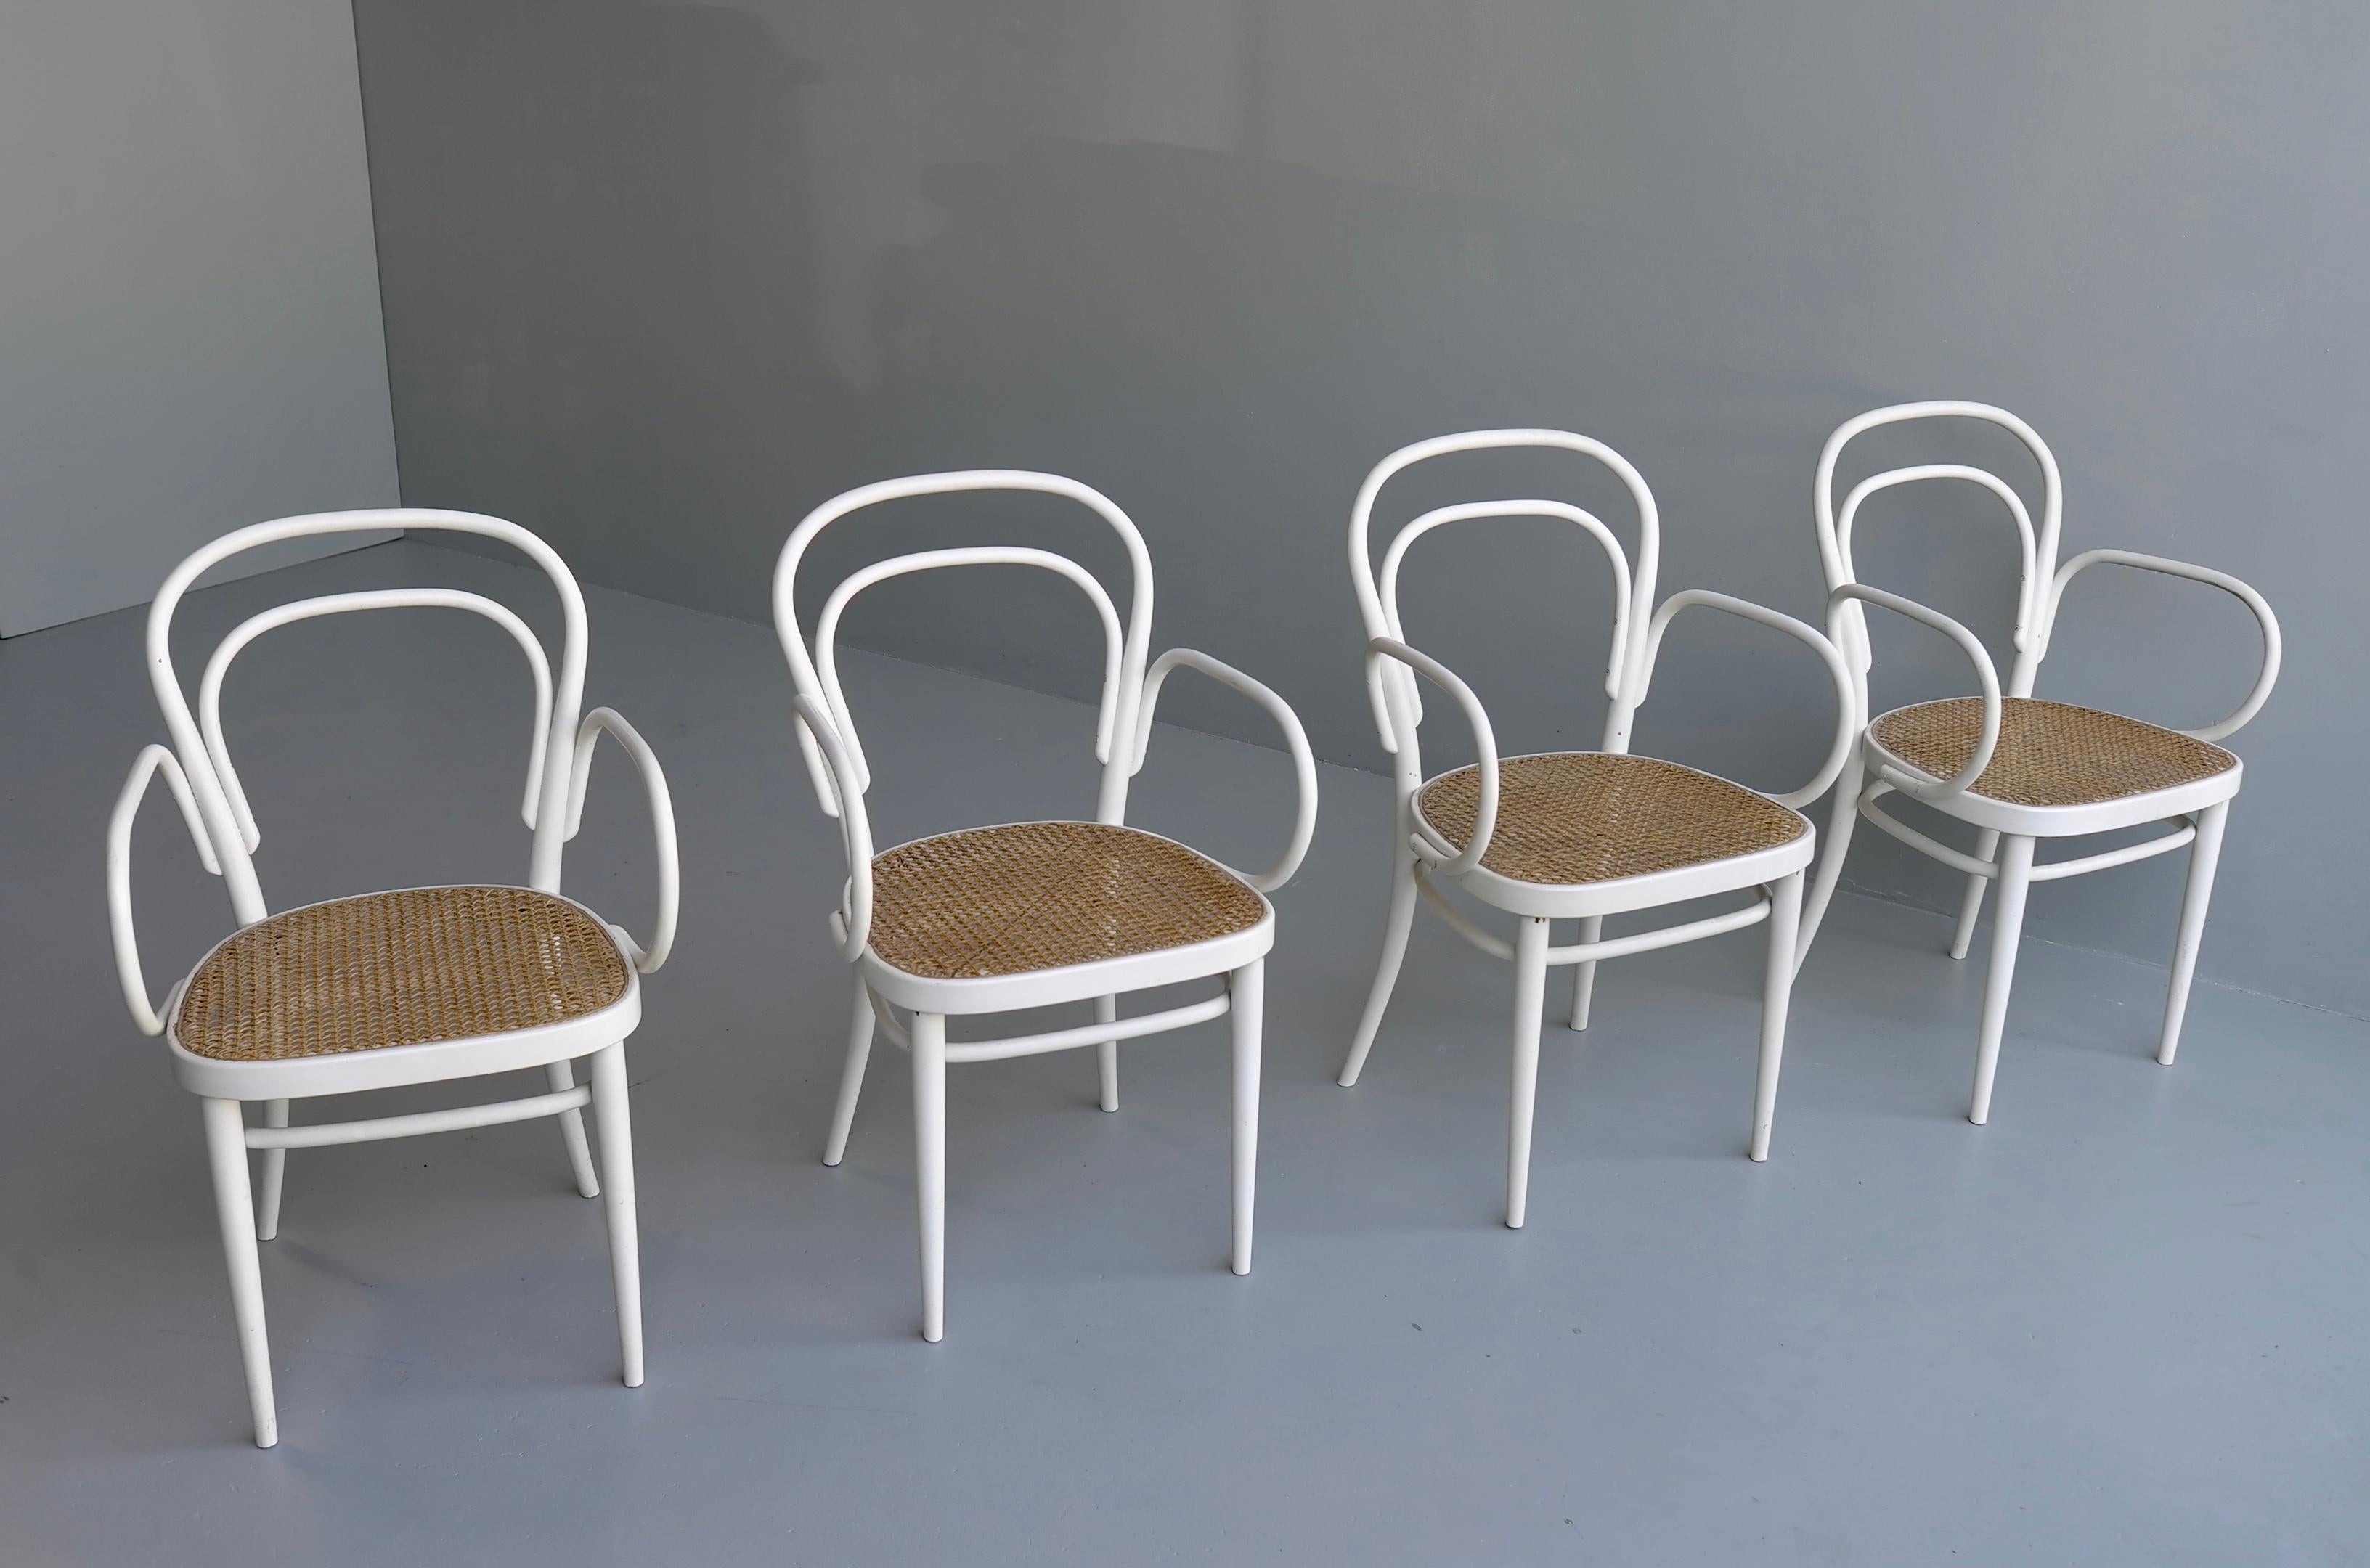 Set of Four White Thonet nr. 14 Armchairs with Wicker Seats, Vienna, 1960s For Sale 2